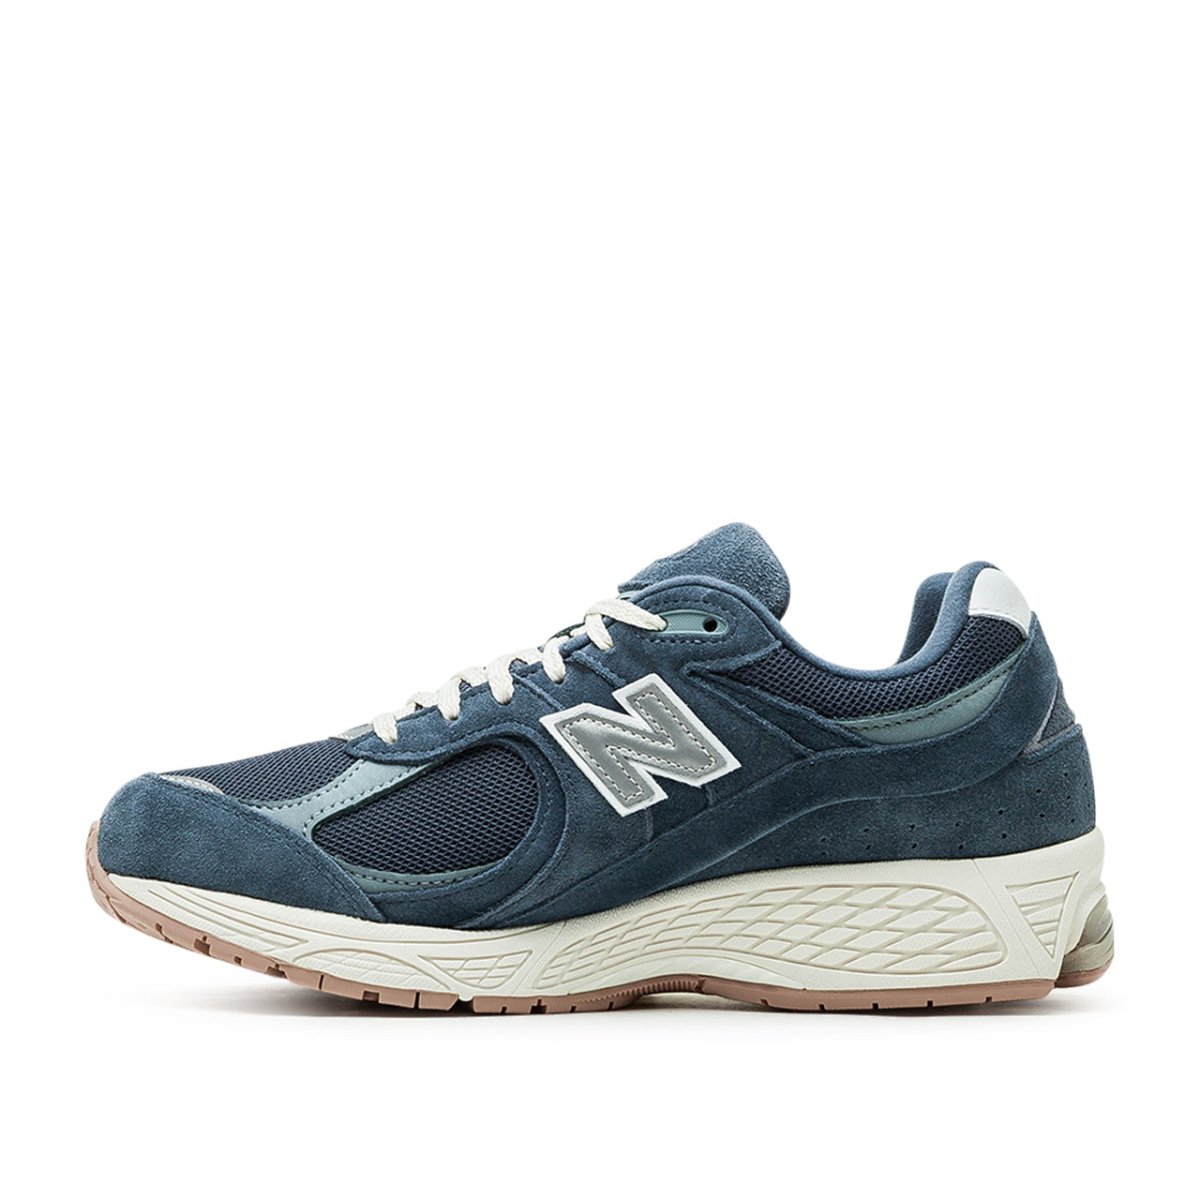 New Balance M2002RHC 'Higher Learning Pack' (Navy)  - Allike Store